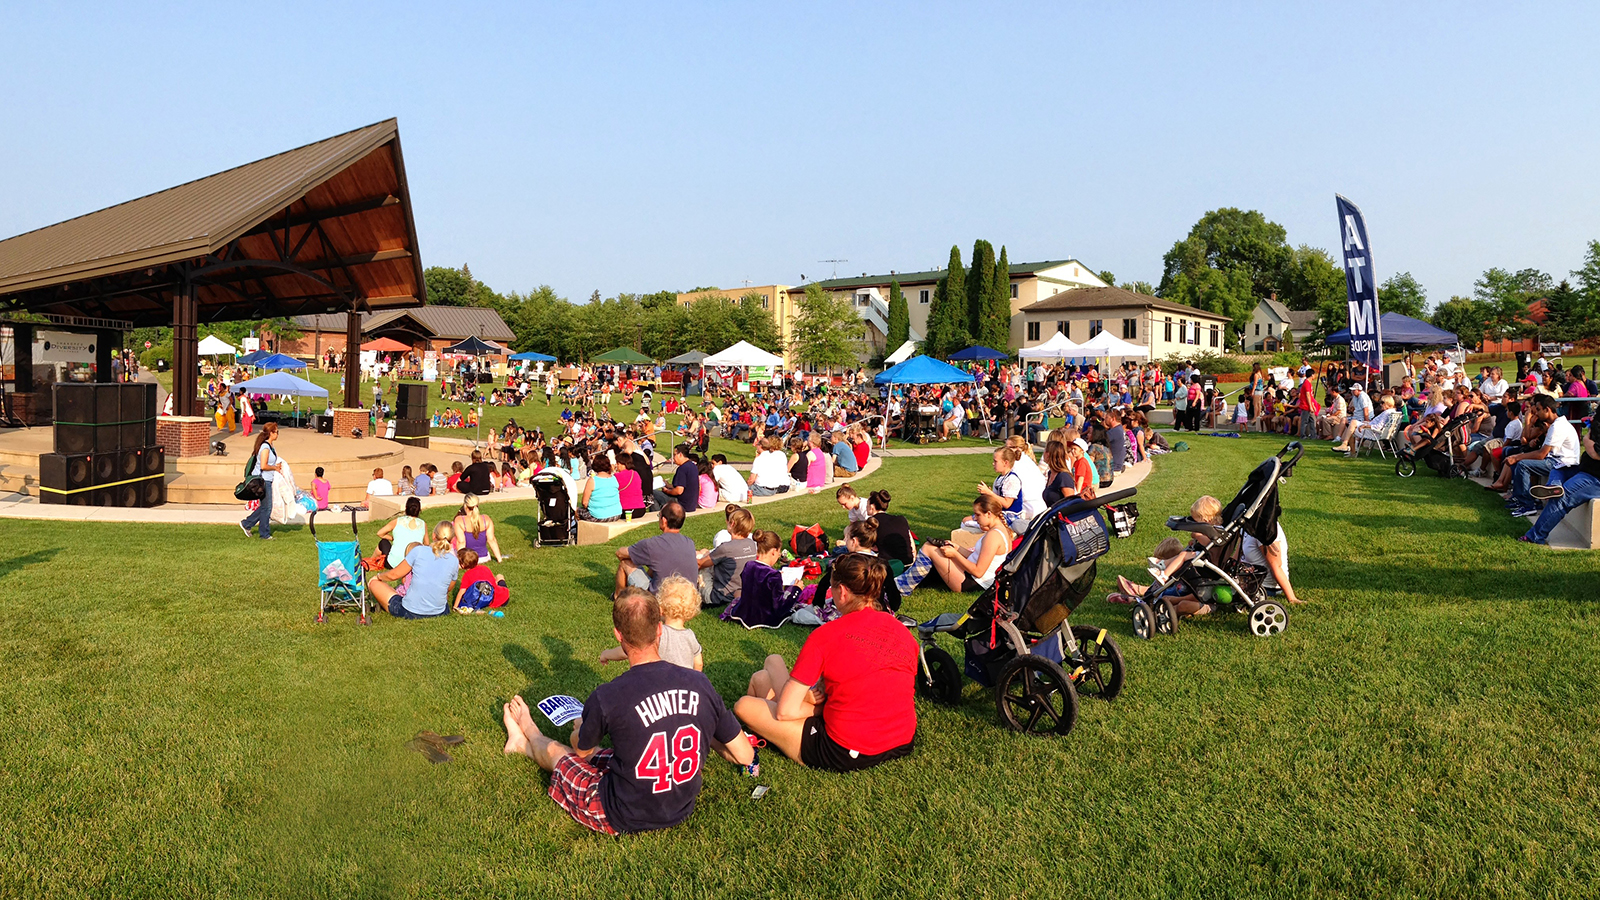 Huber Park Performance & Event Series: South of the River Community Band